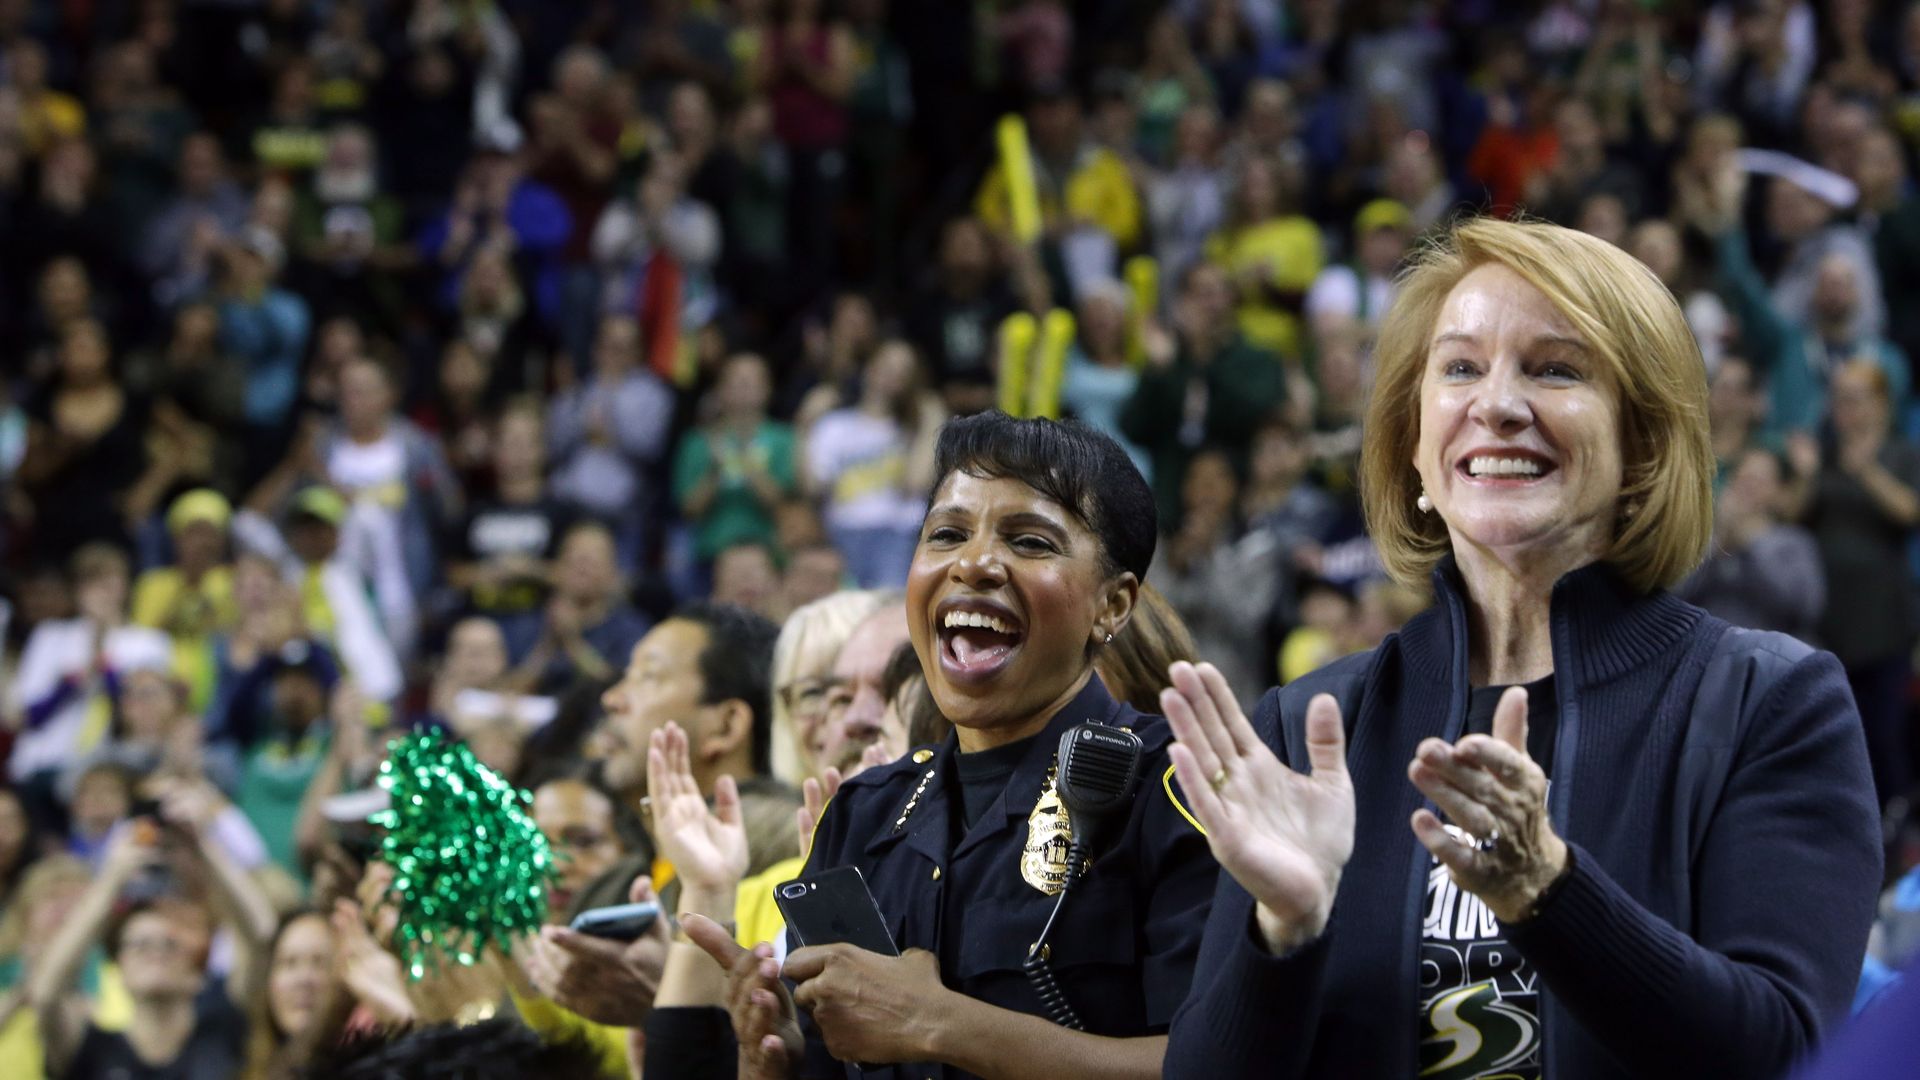 Image of former Seattle Mayor Jenny Durkan with ex-police chief Carmen Best cheering during a Seattle Storms basketball game.